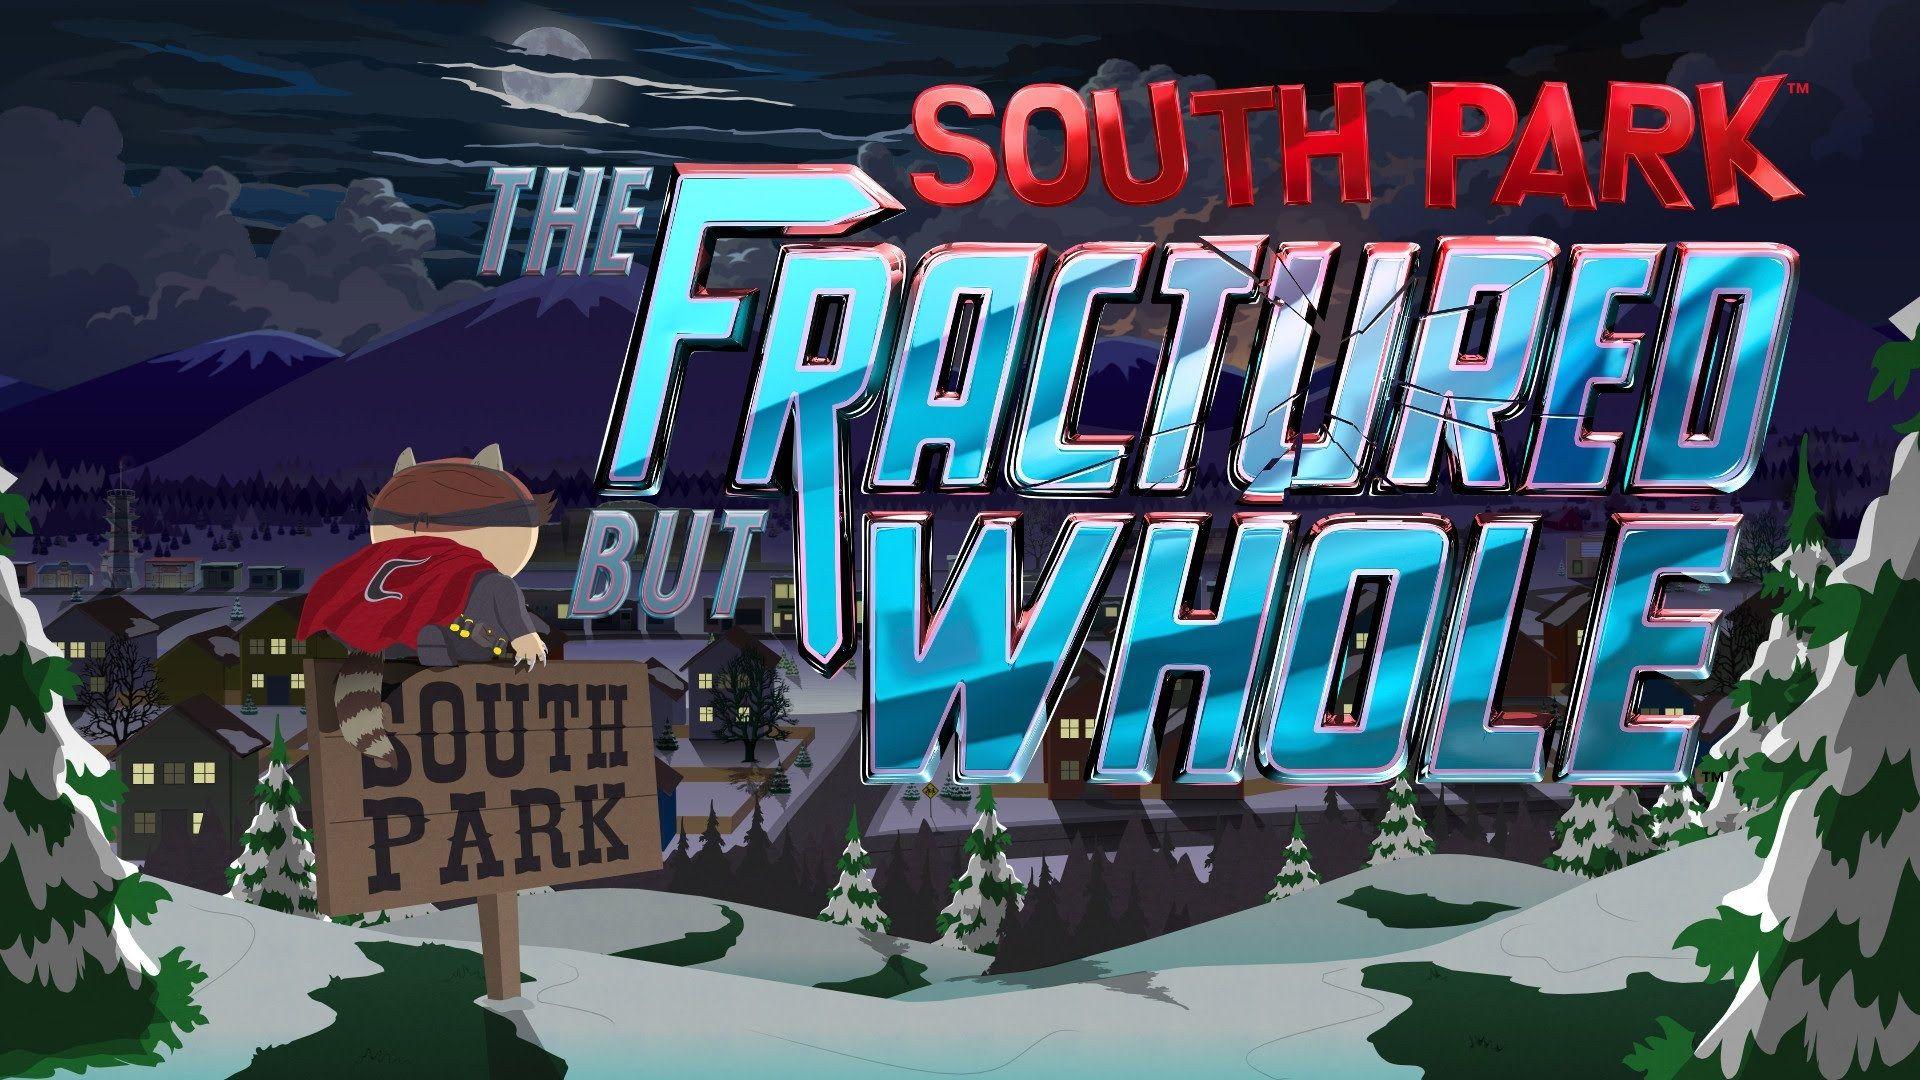 South Park: The Fractured But Whole. South Park Archives